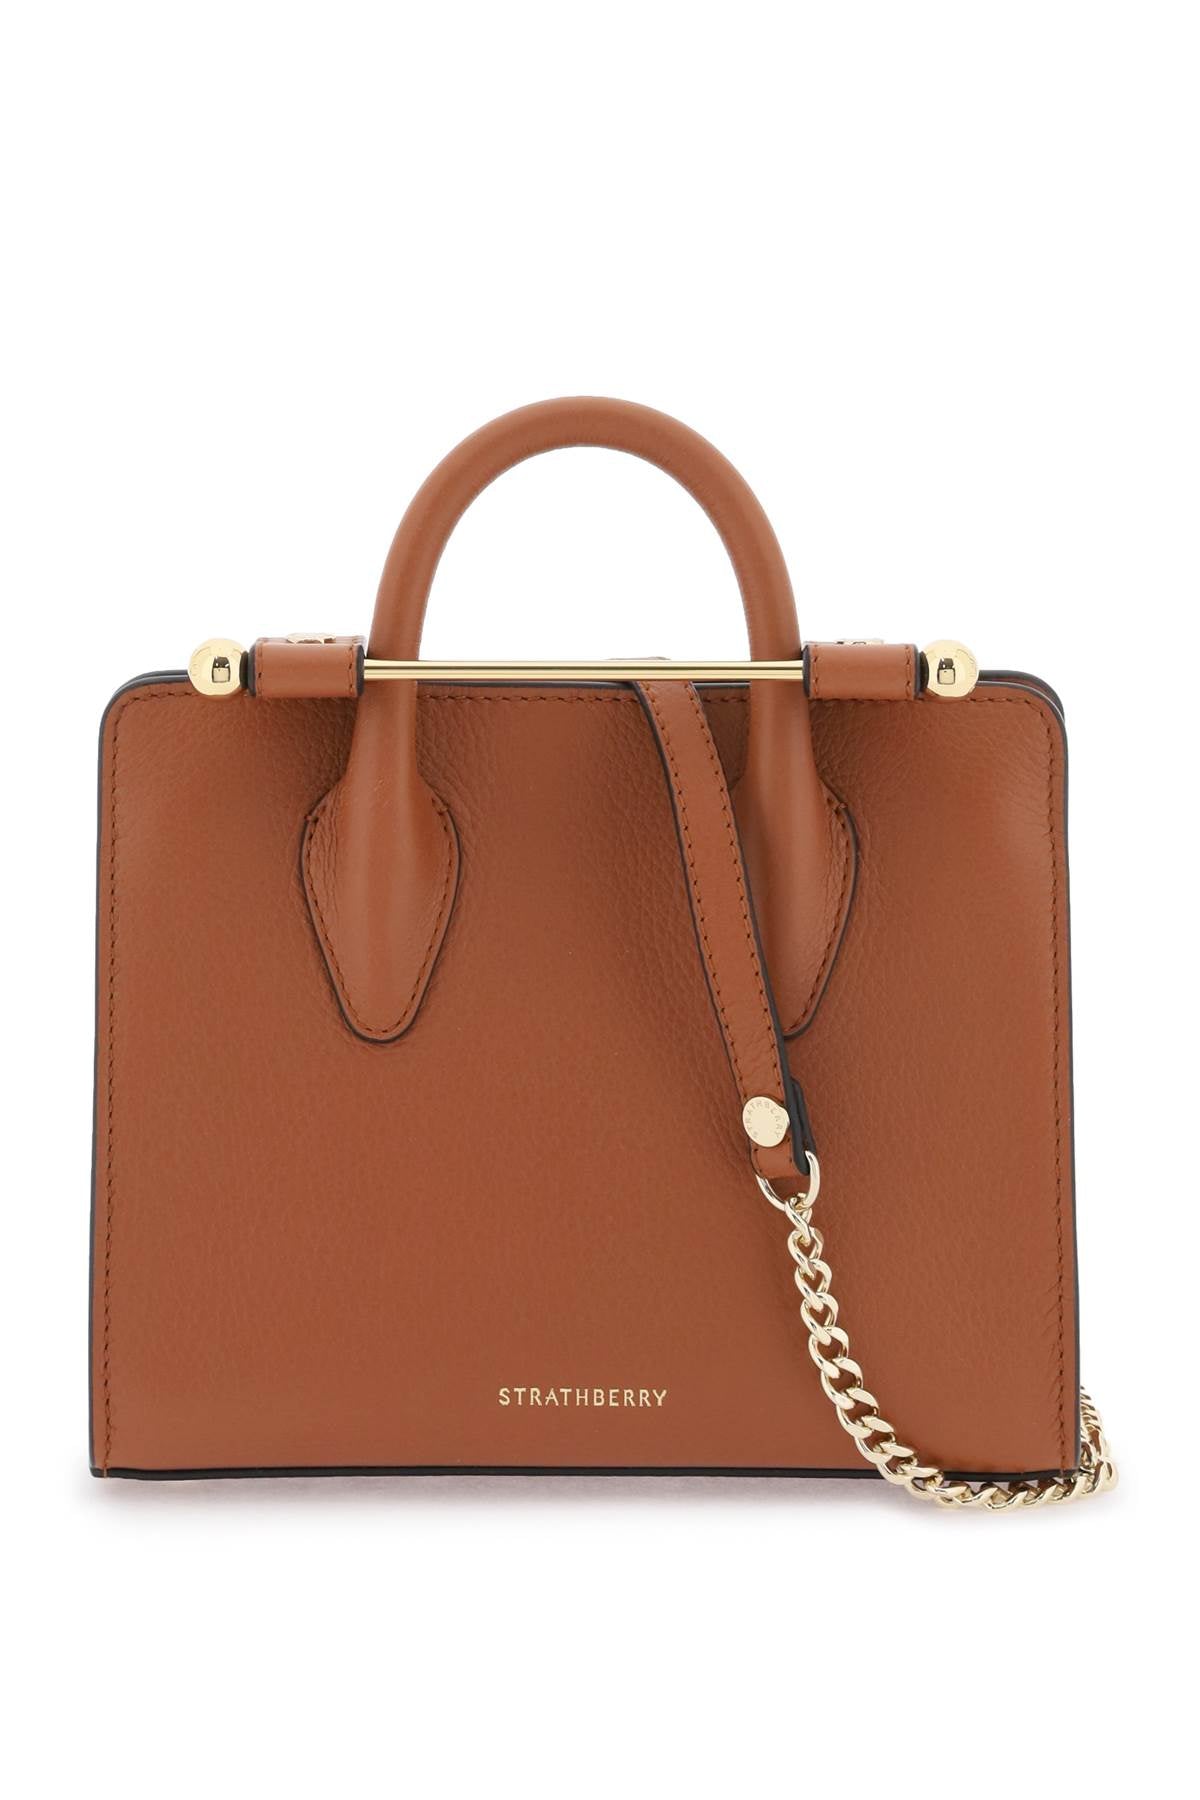 Strathberry nano tote leather bag-0